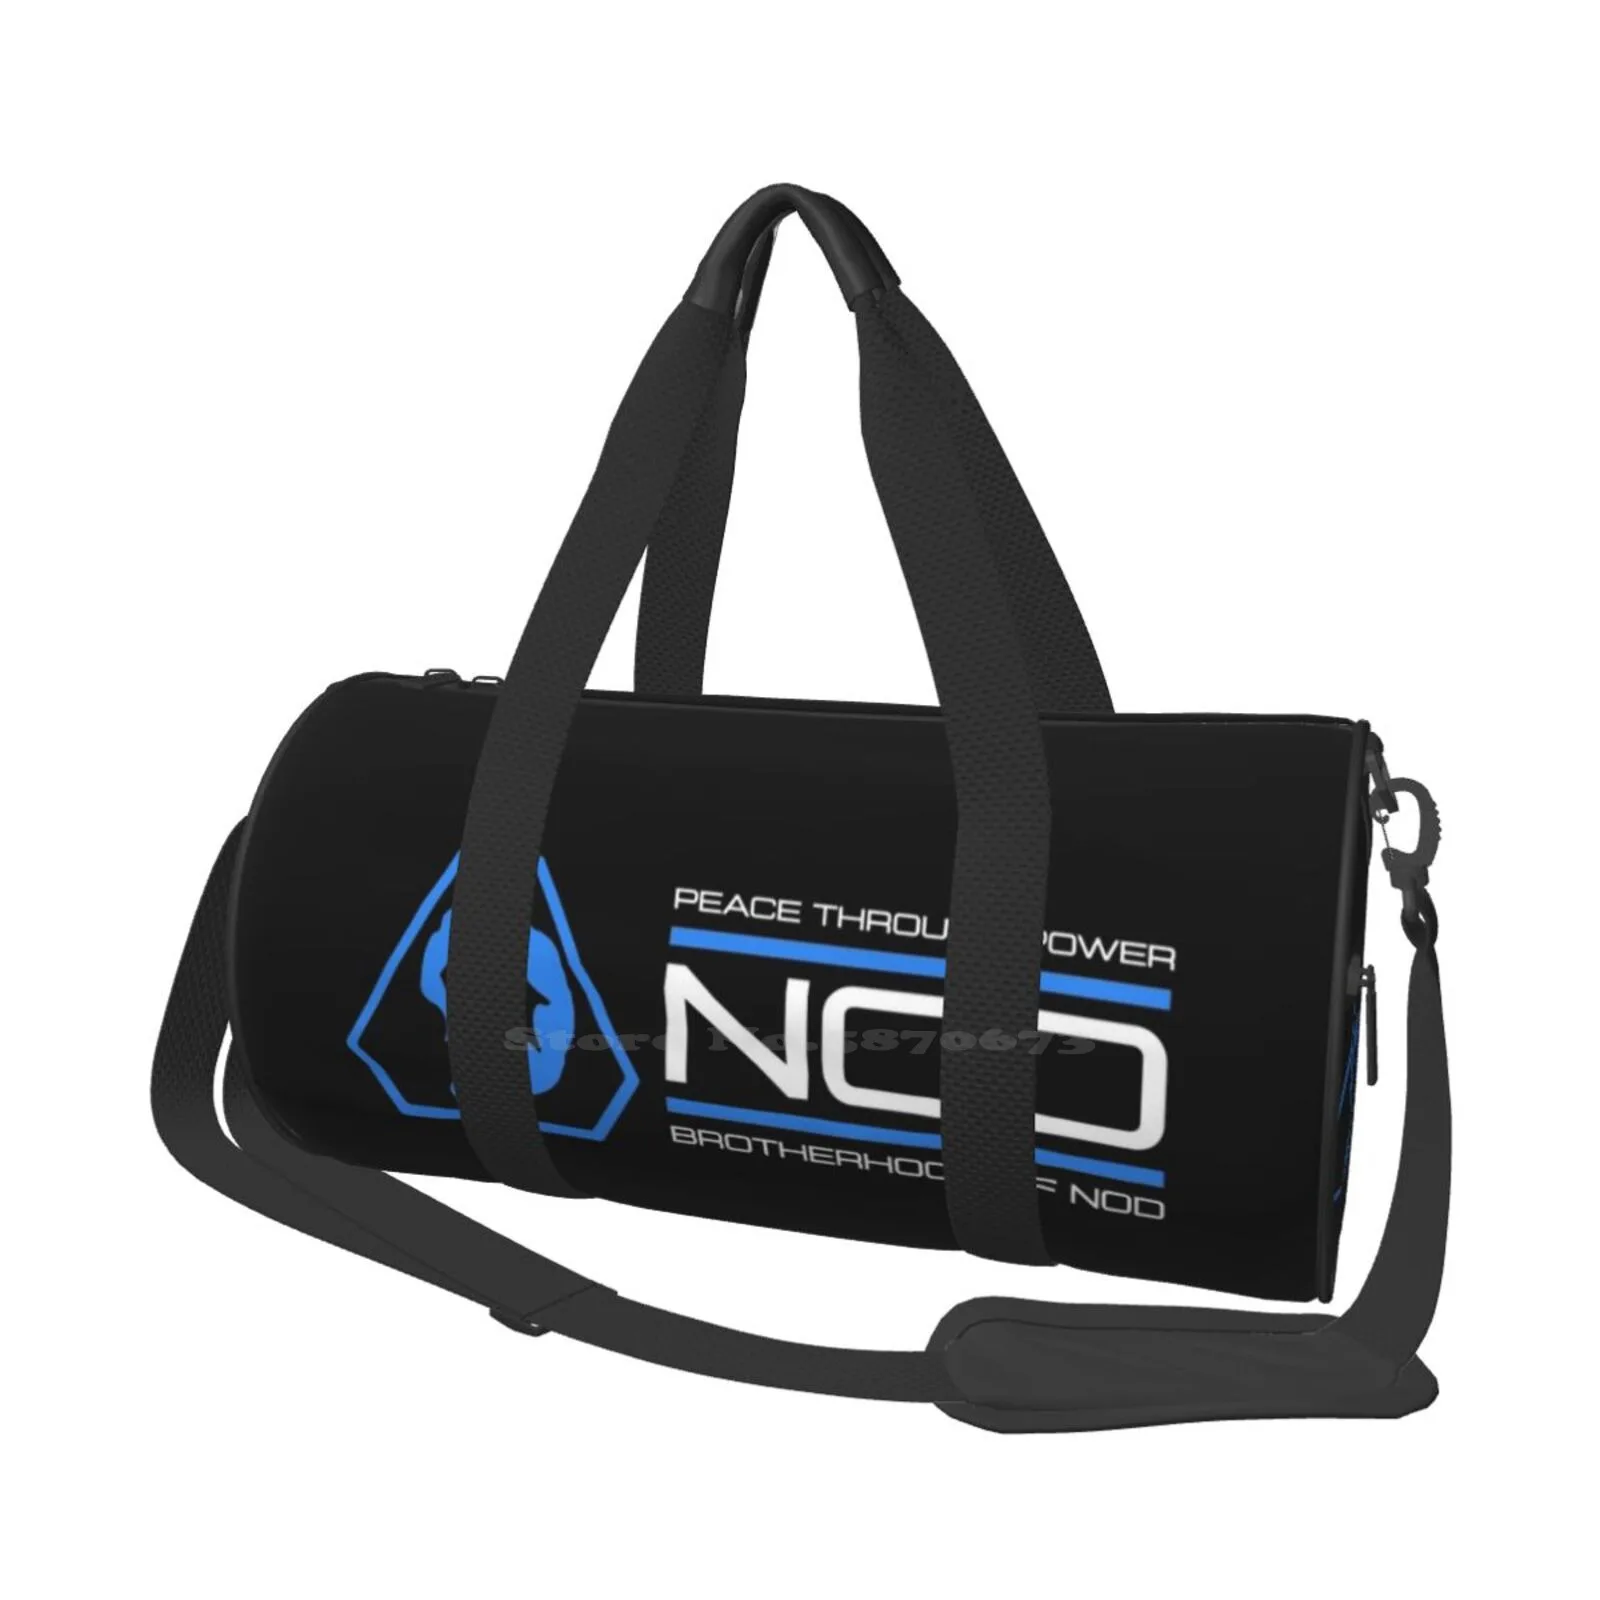 

Brotherhood Of Nod Shoulder Bag Shopping Storage Bags Satchel Men Women Brotherhood Of Nod Command And Conquer Peace Through